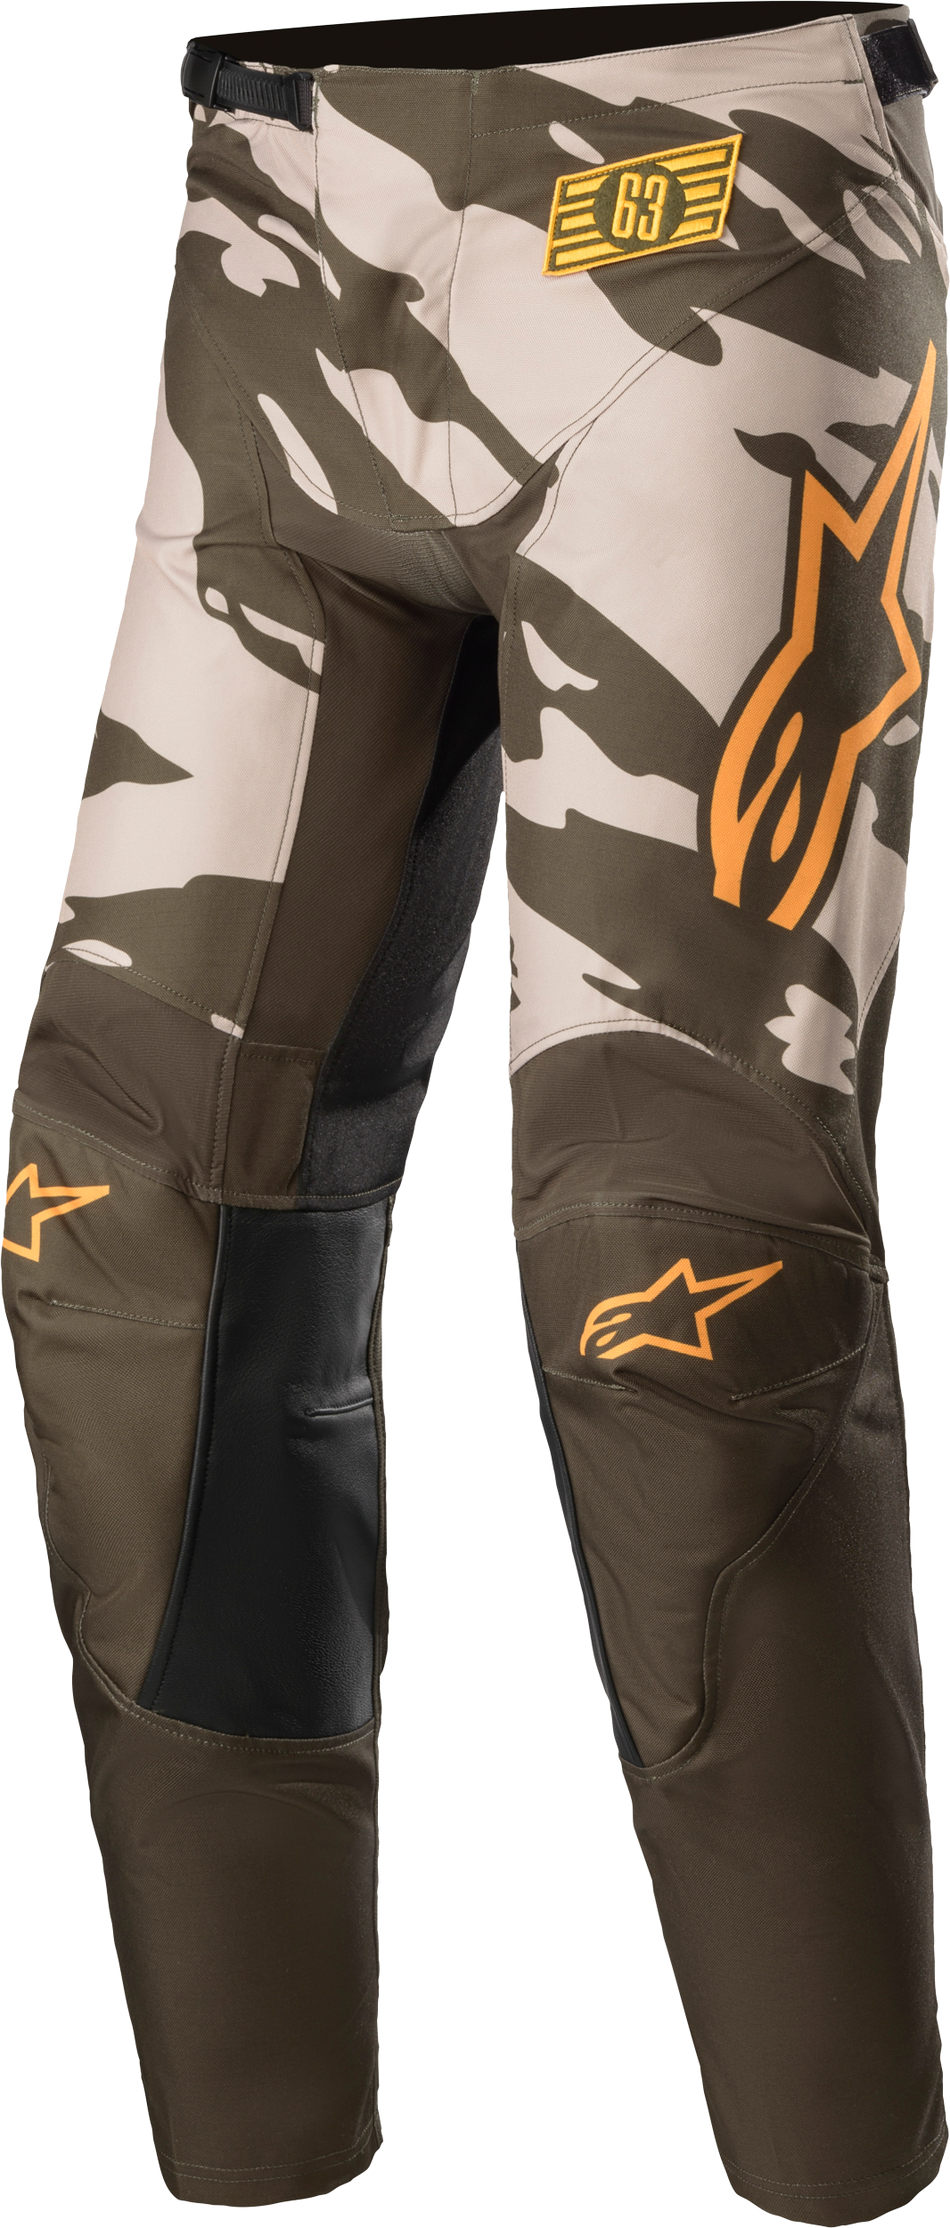 ALPINESTARS Youth Racer Tactical Pants Mltry/Sand Camo/Tange Sz 22 3741222-6840-22